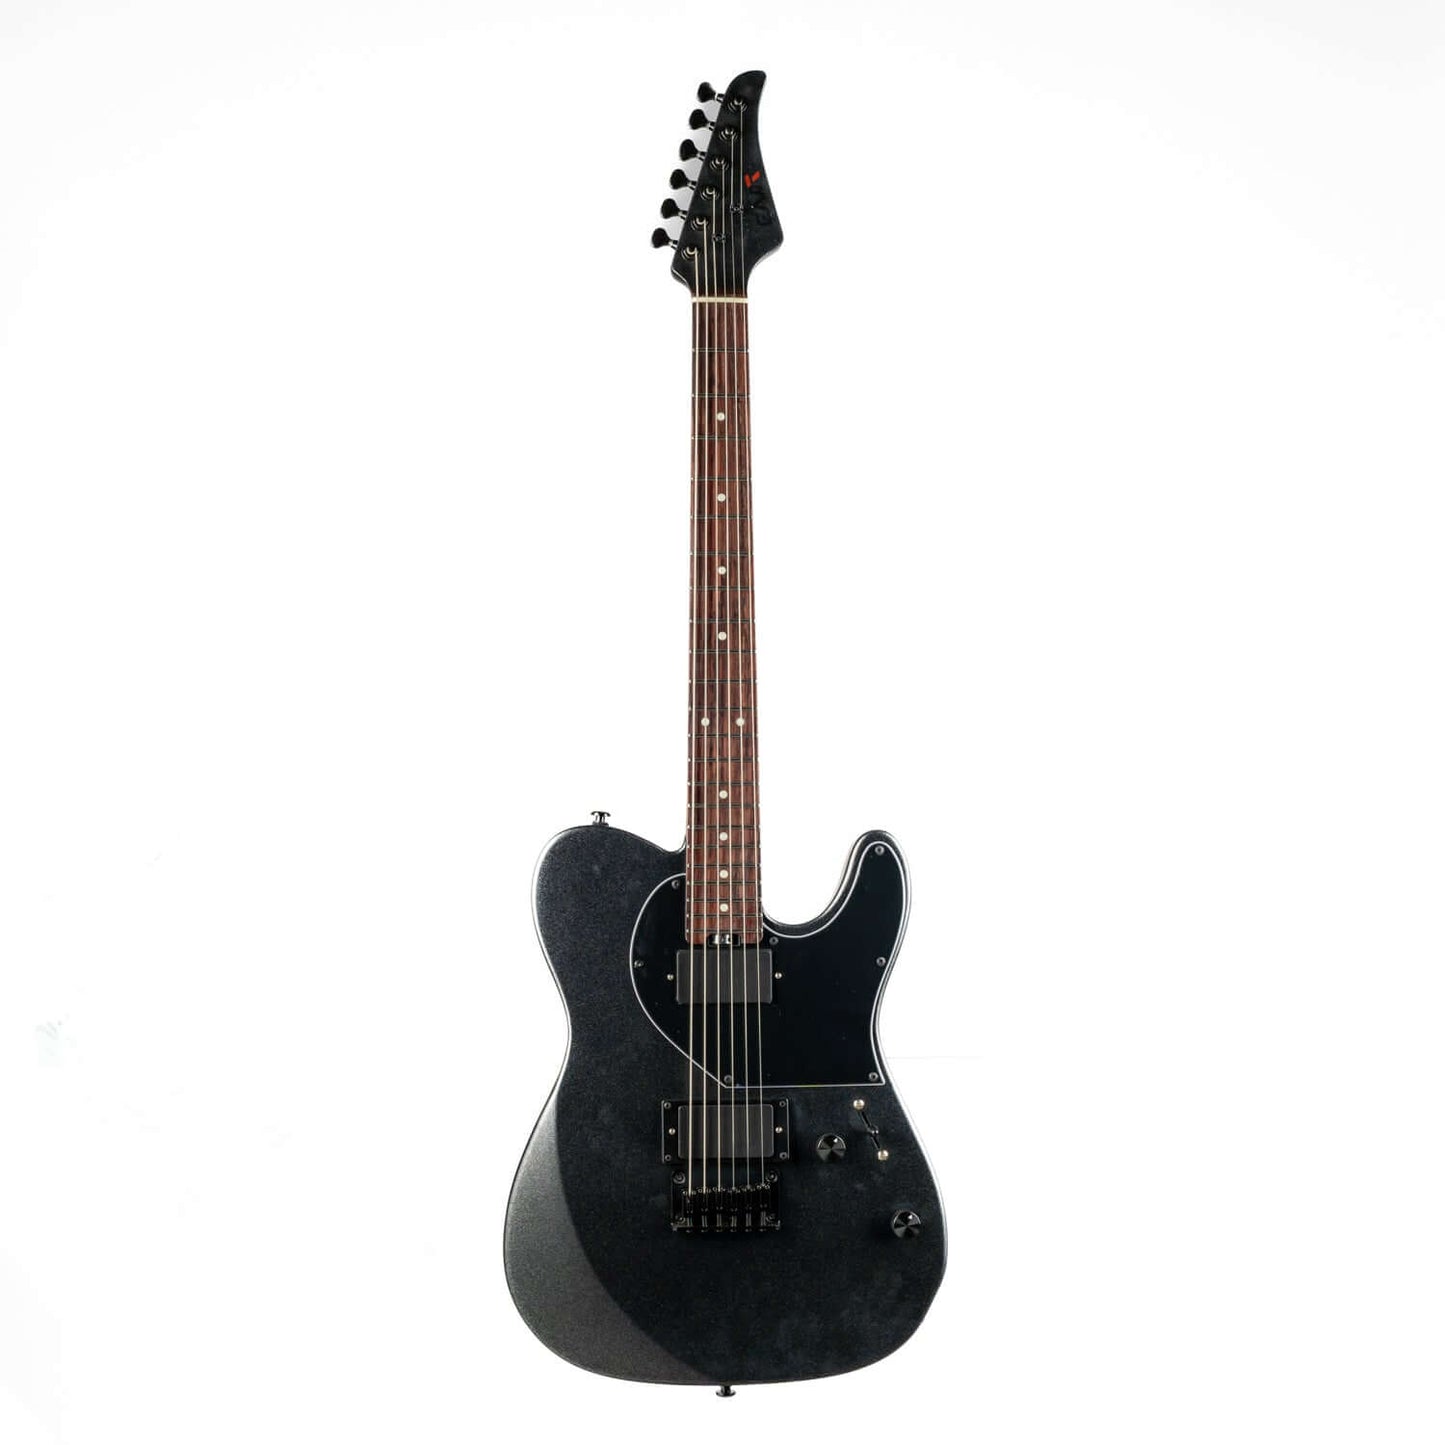 EART TL-281 electric guitar lateral image